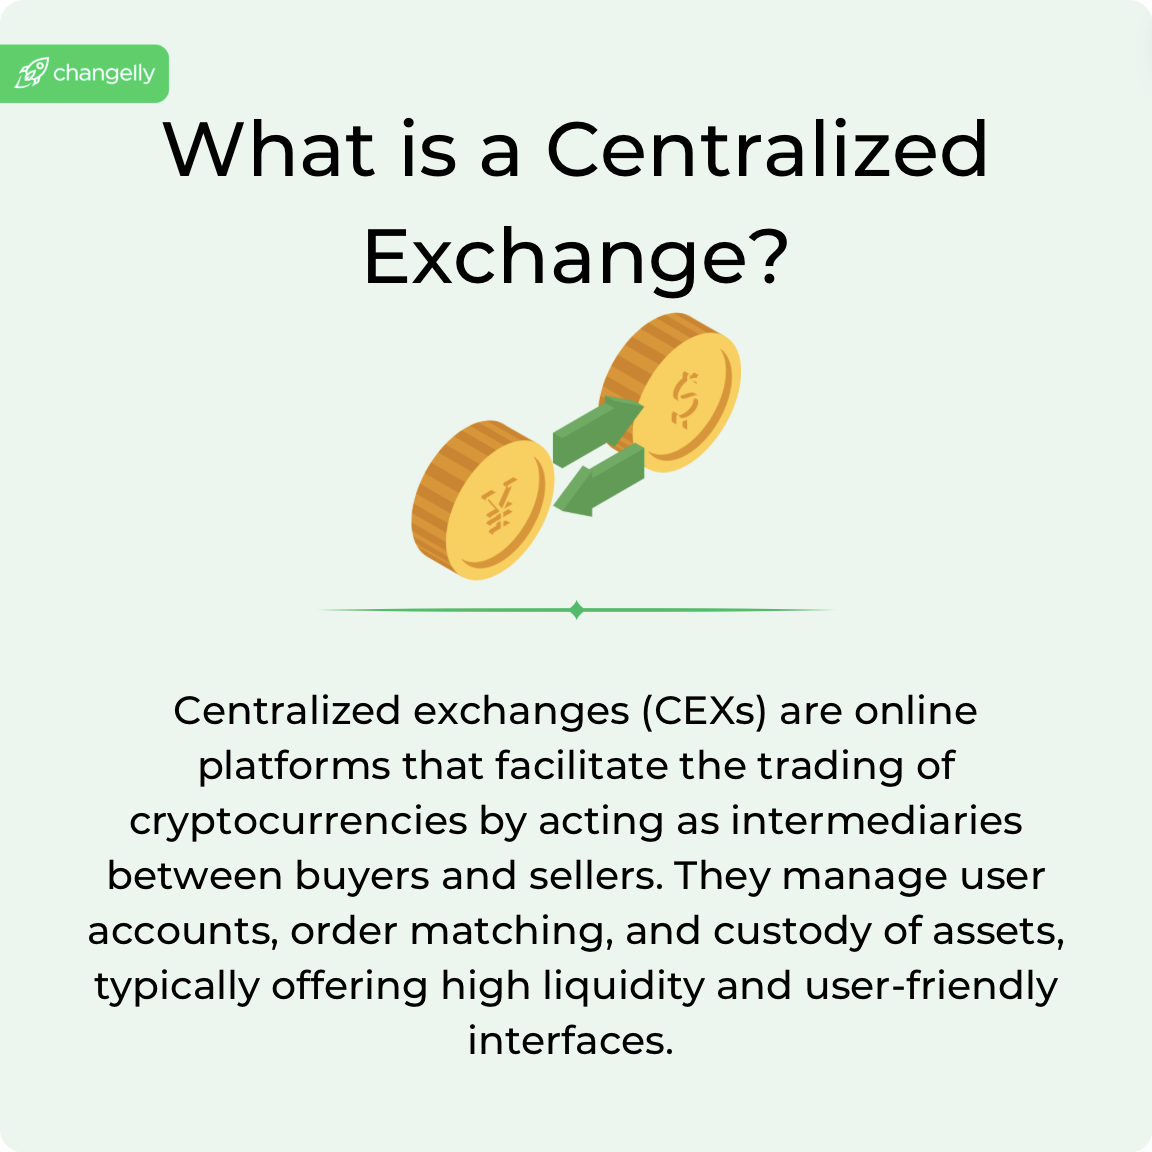 What is a centralized exchange?